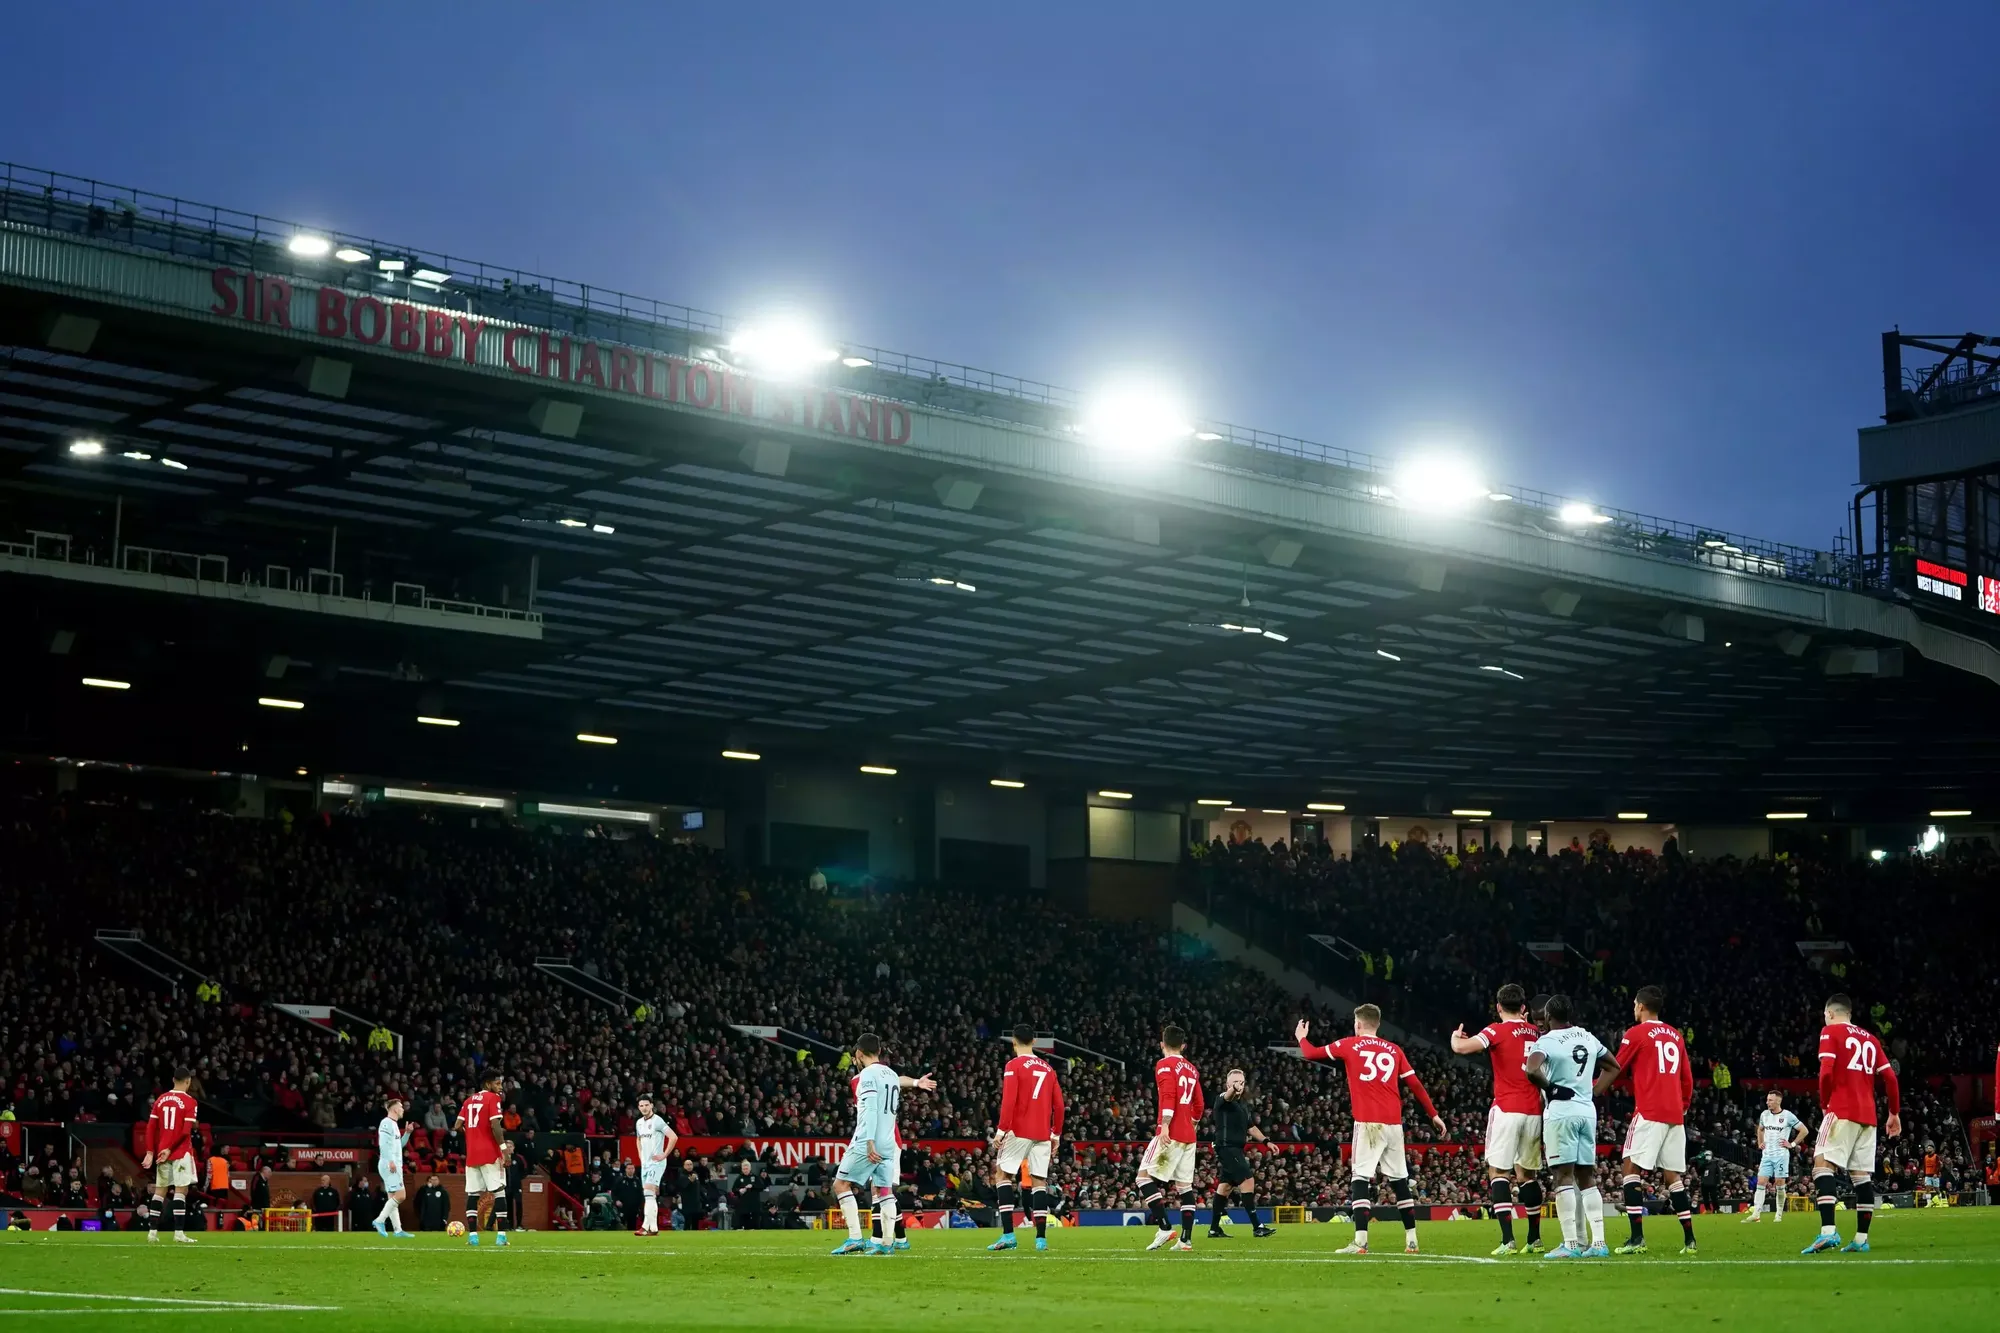 Manchester United manager Ralf Rangnick hailed the atmosphere at Old Trafford